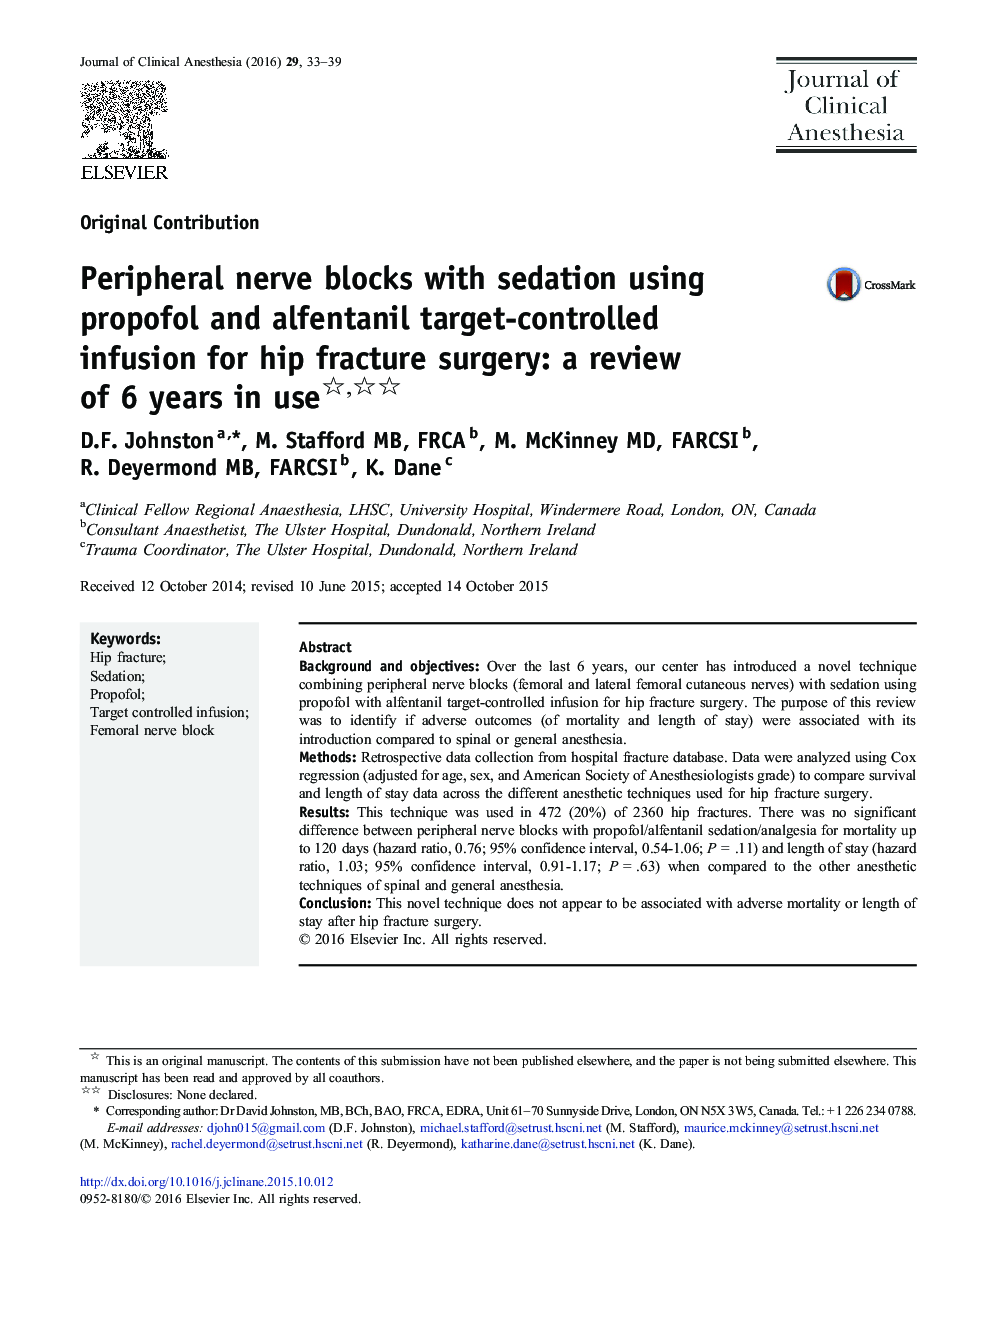 Original ContributionPeripheral nerve blocks with sedation using propofol and alfentanil target-controlled infusion for hip fracture surgery: a review of 6 years in use